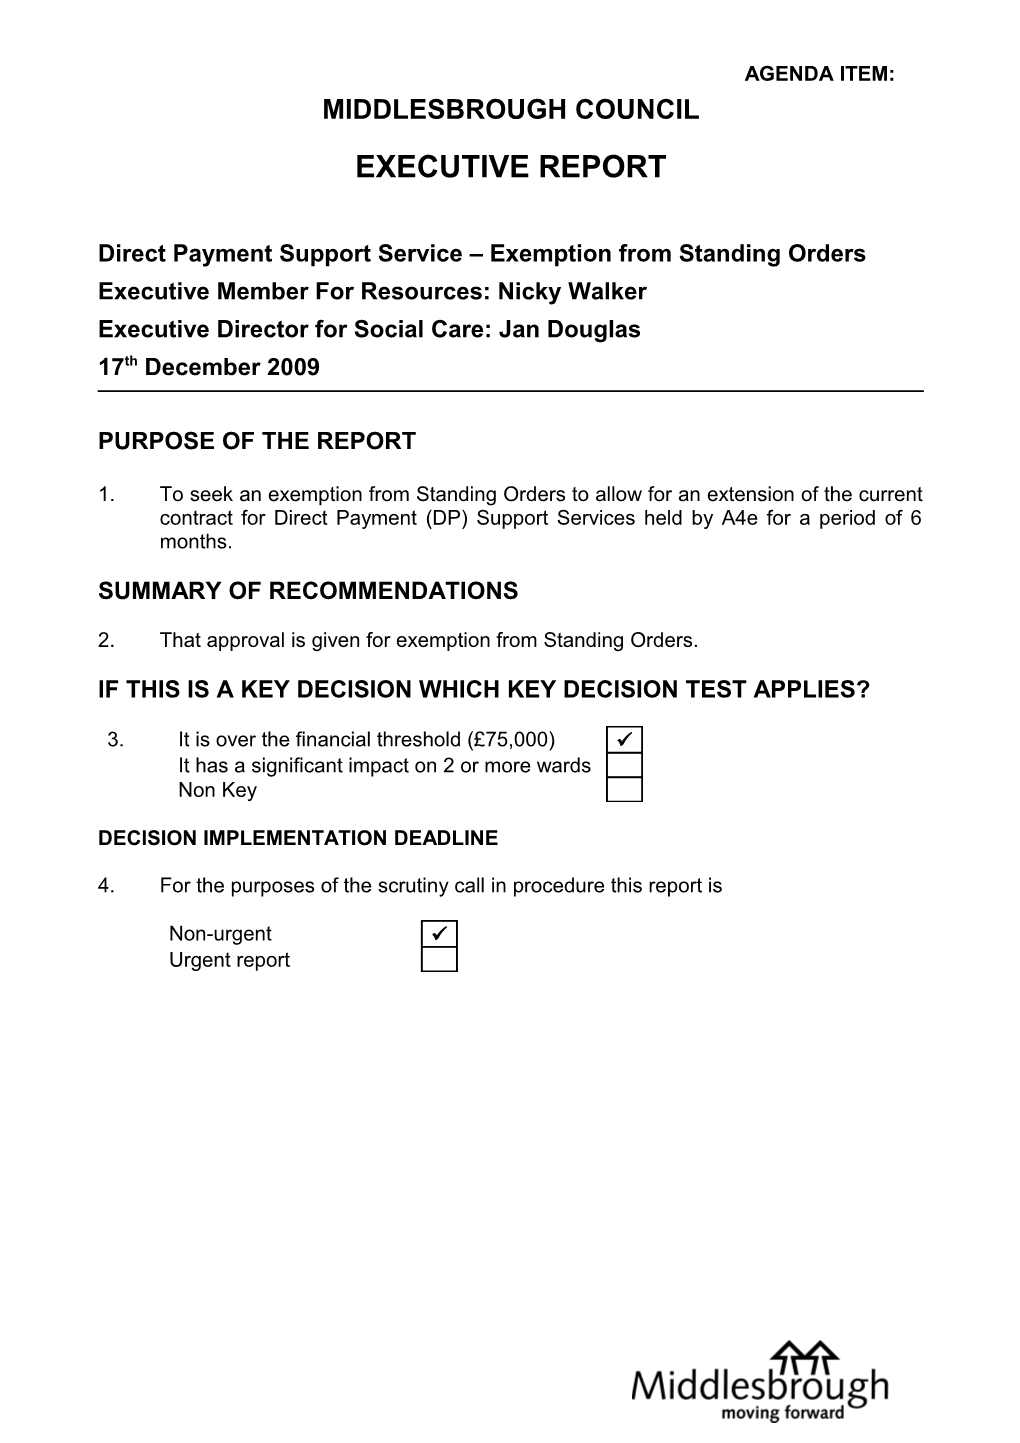 Direct Payment Support Service Exemption from Standing Orders